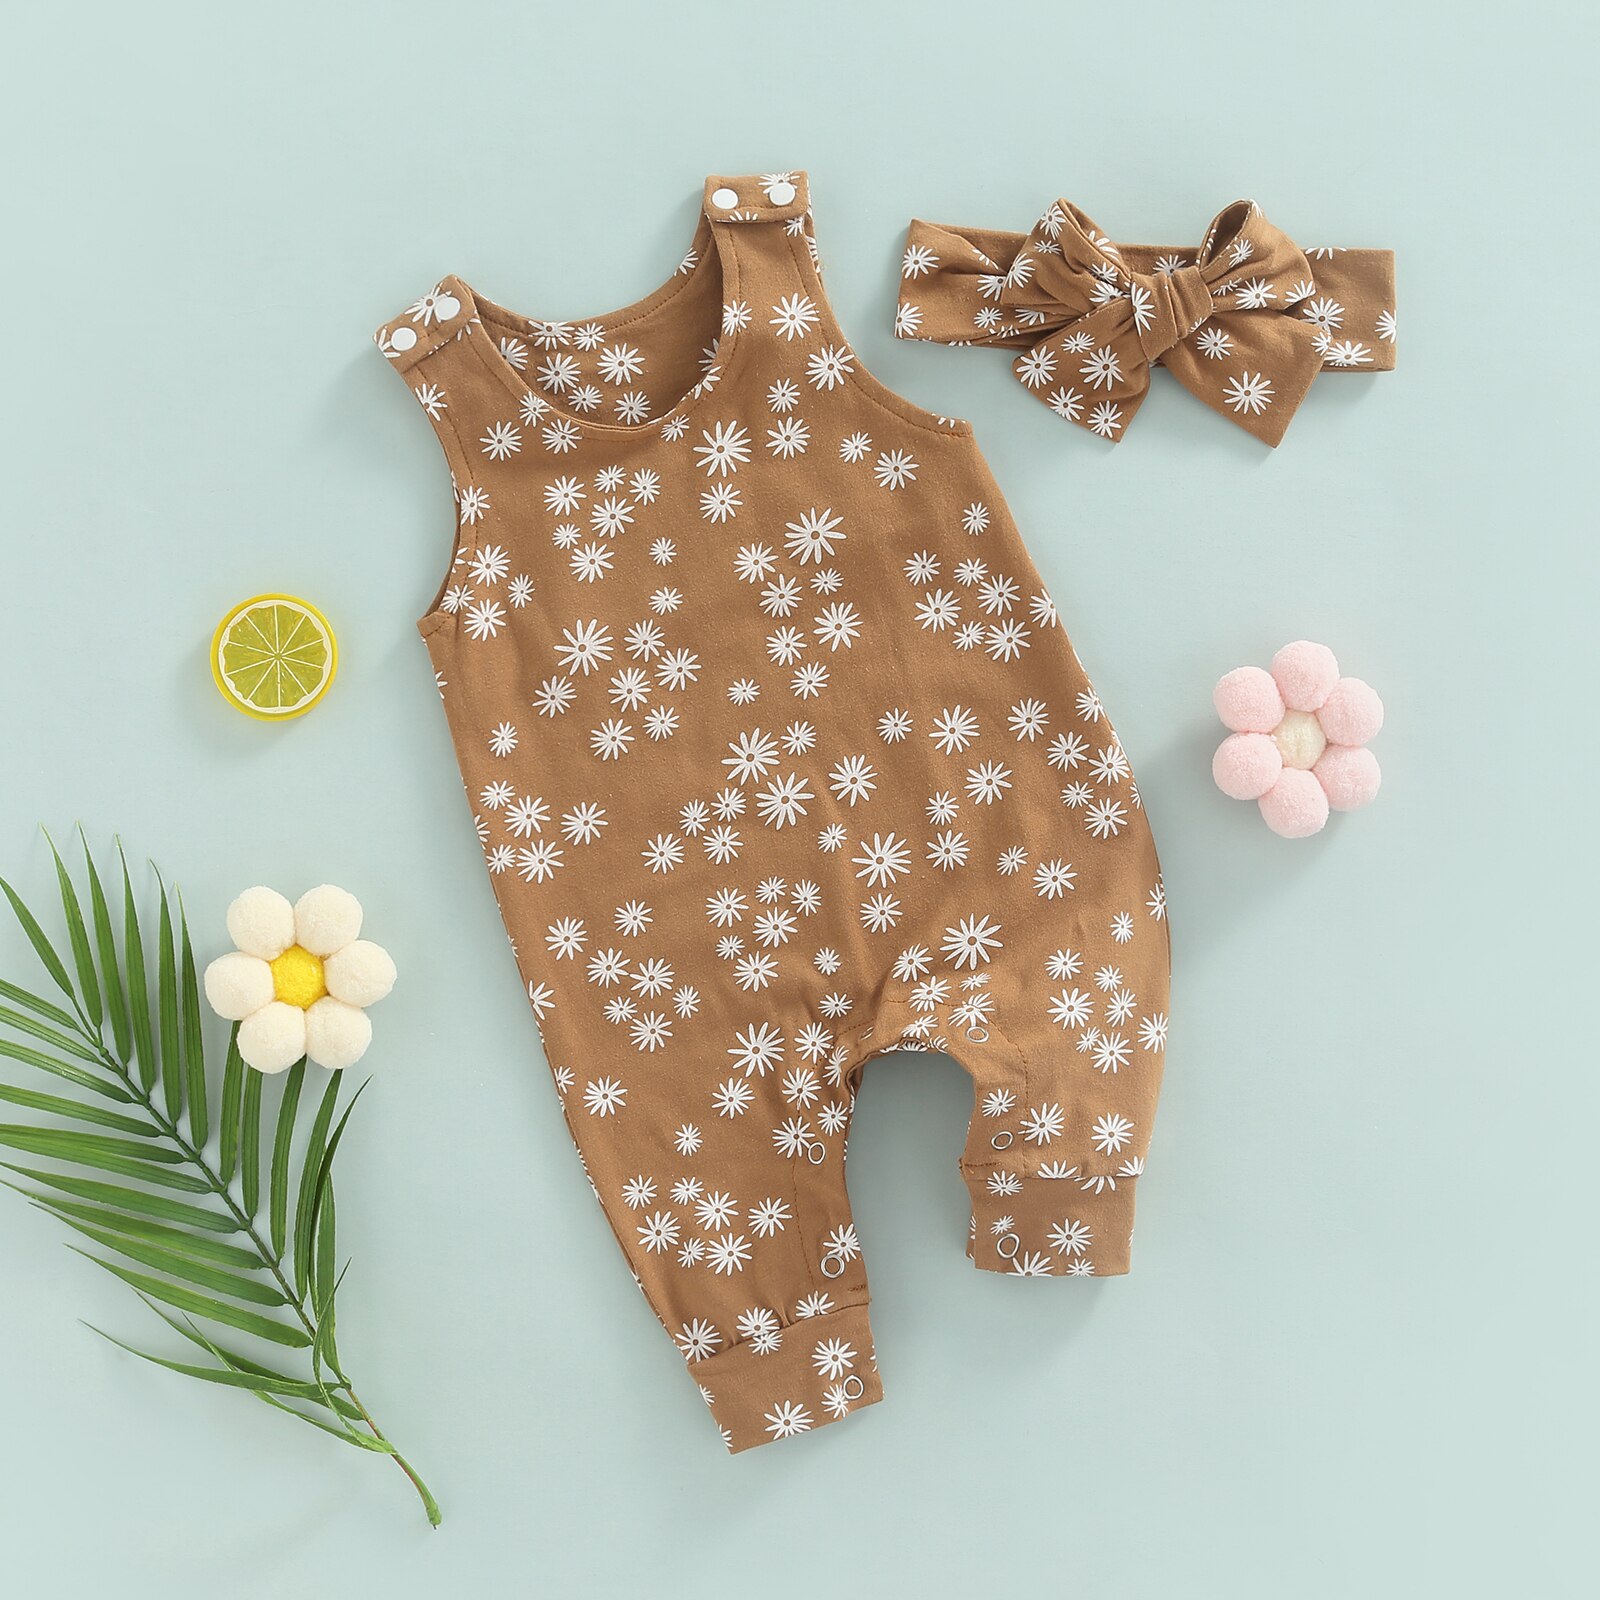 Summer-Baby-Girls-Casual-Sleeveless-Daisy-Print-Jumpsuit-Romper-Headband-Toddler-Girl-Jumpsuit-Outfit-Clothes-Sets-1